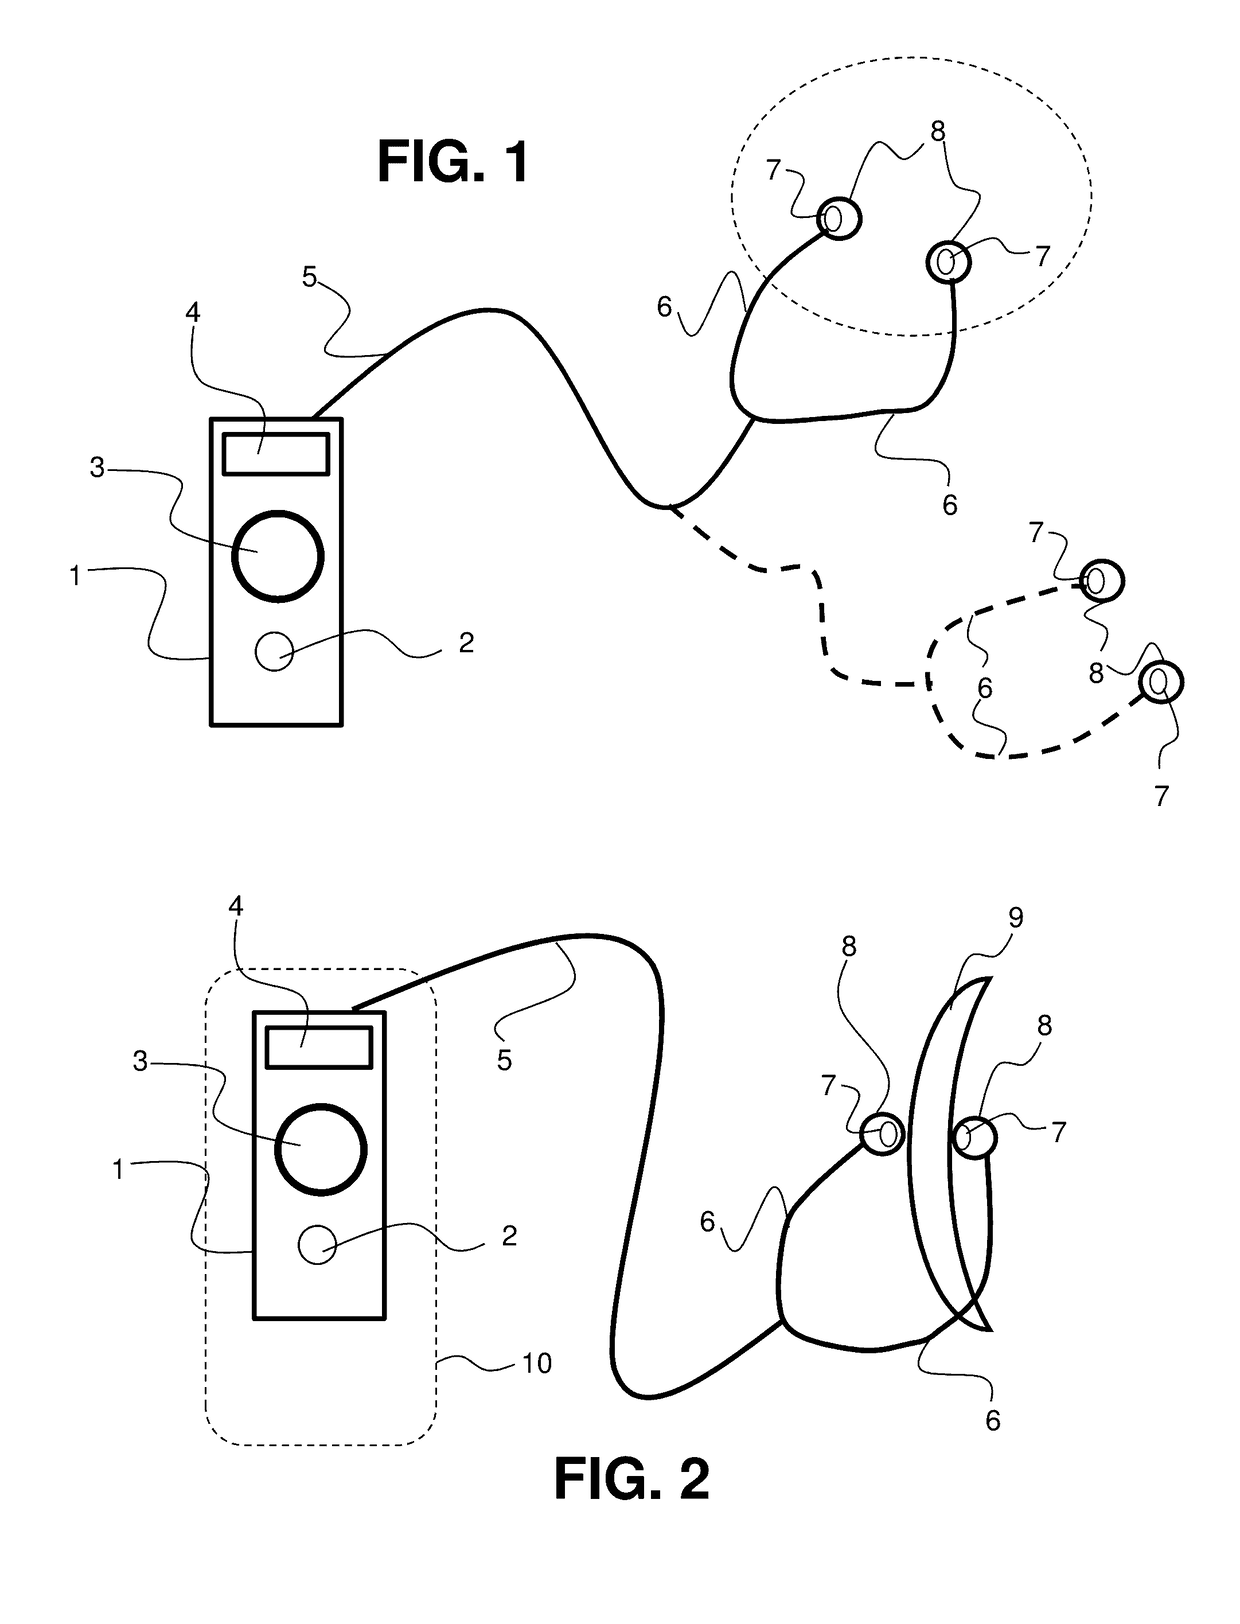 Transcutaneous electrostimulator and methods for electric stimulation